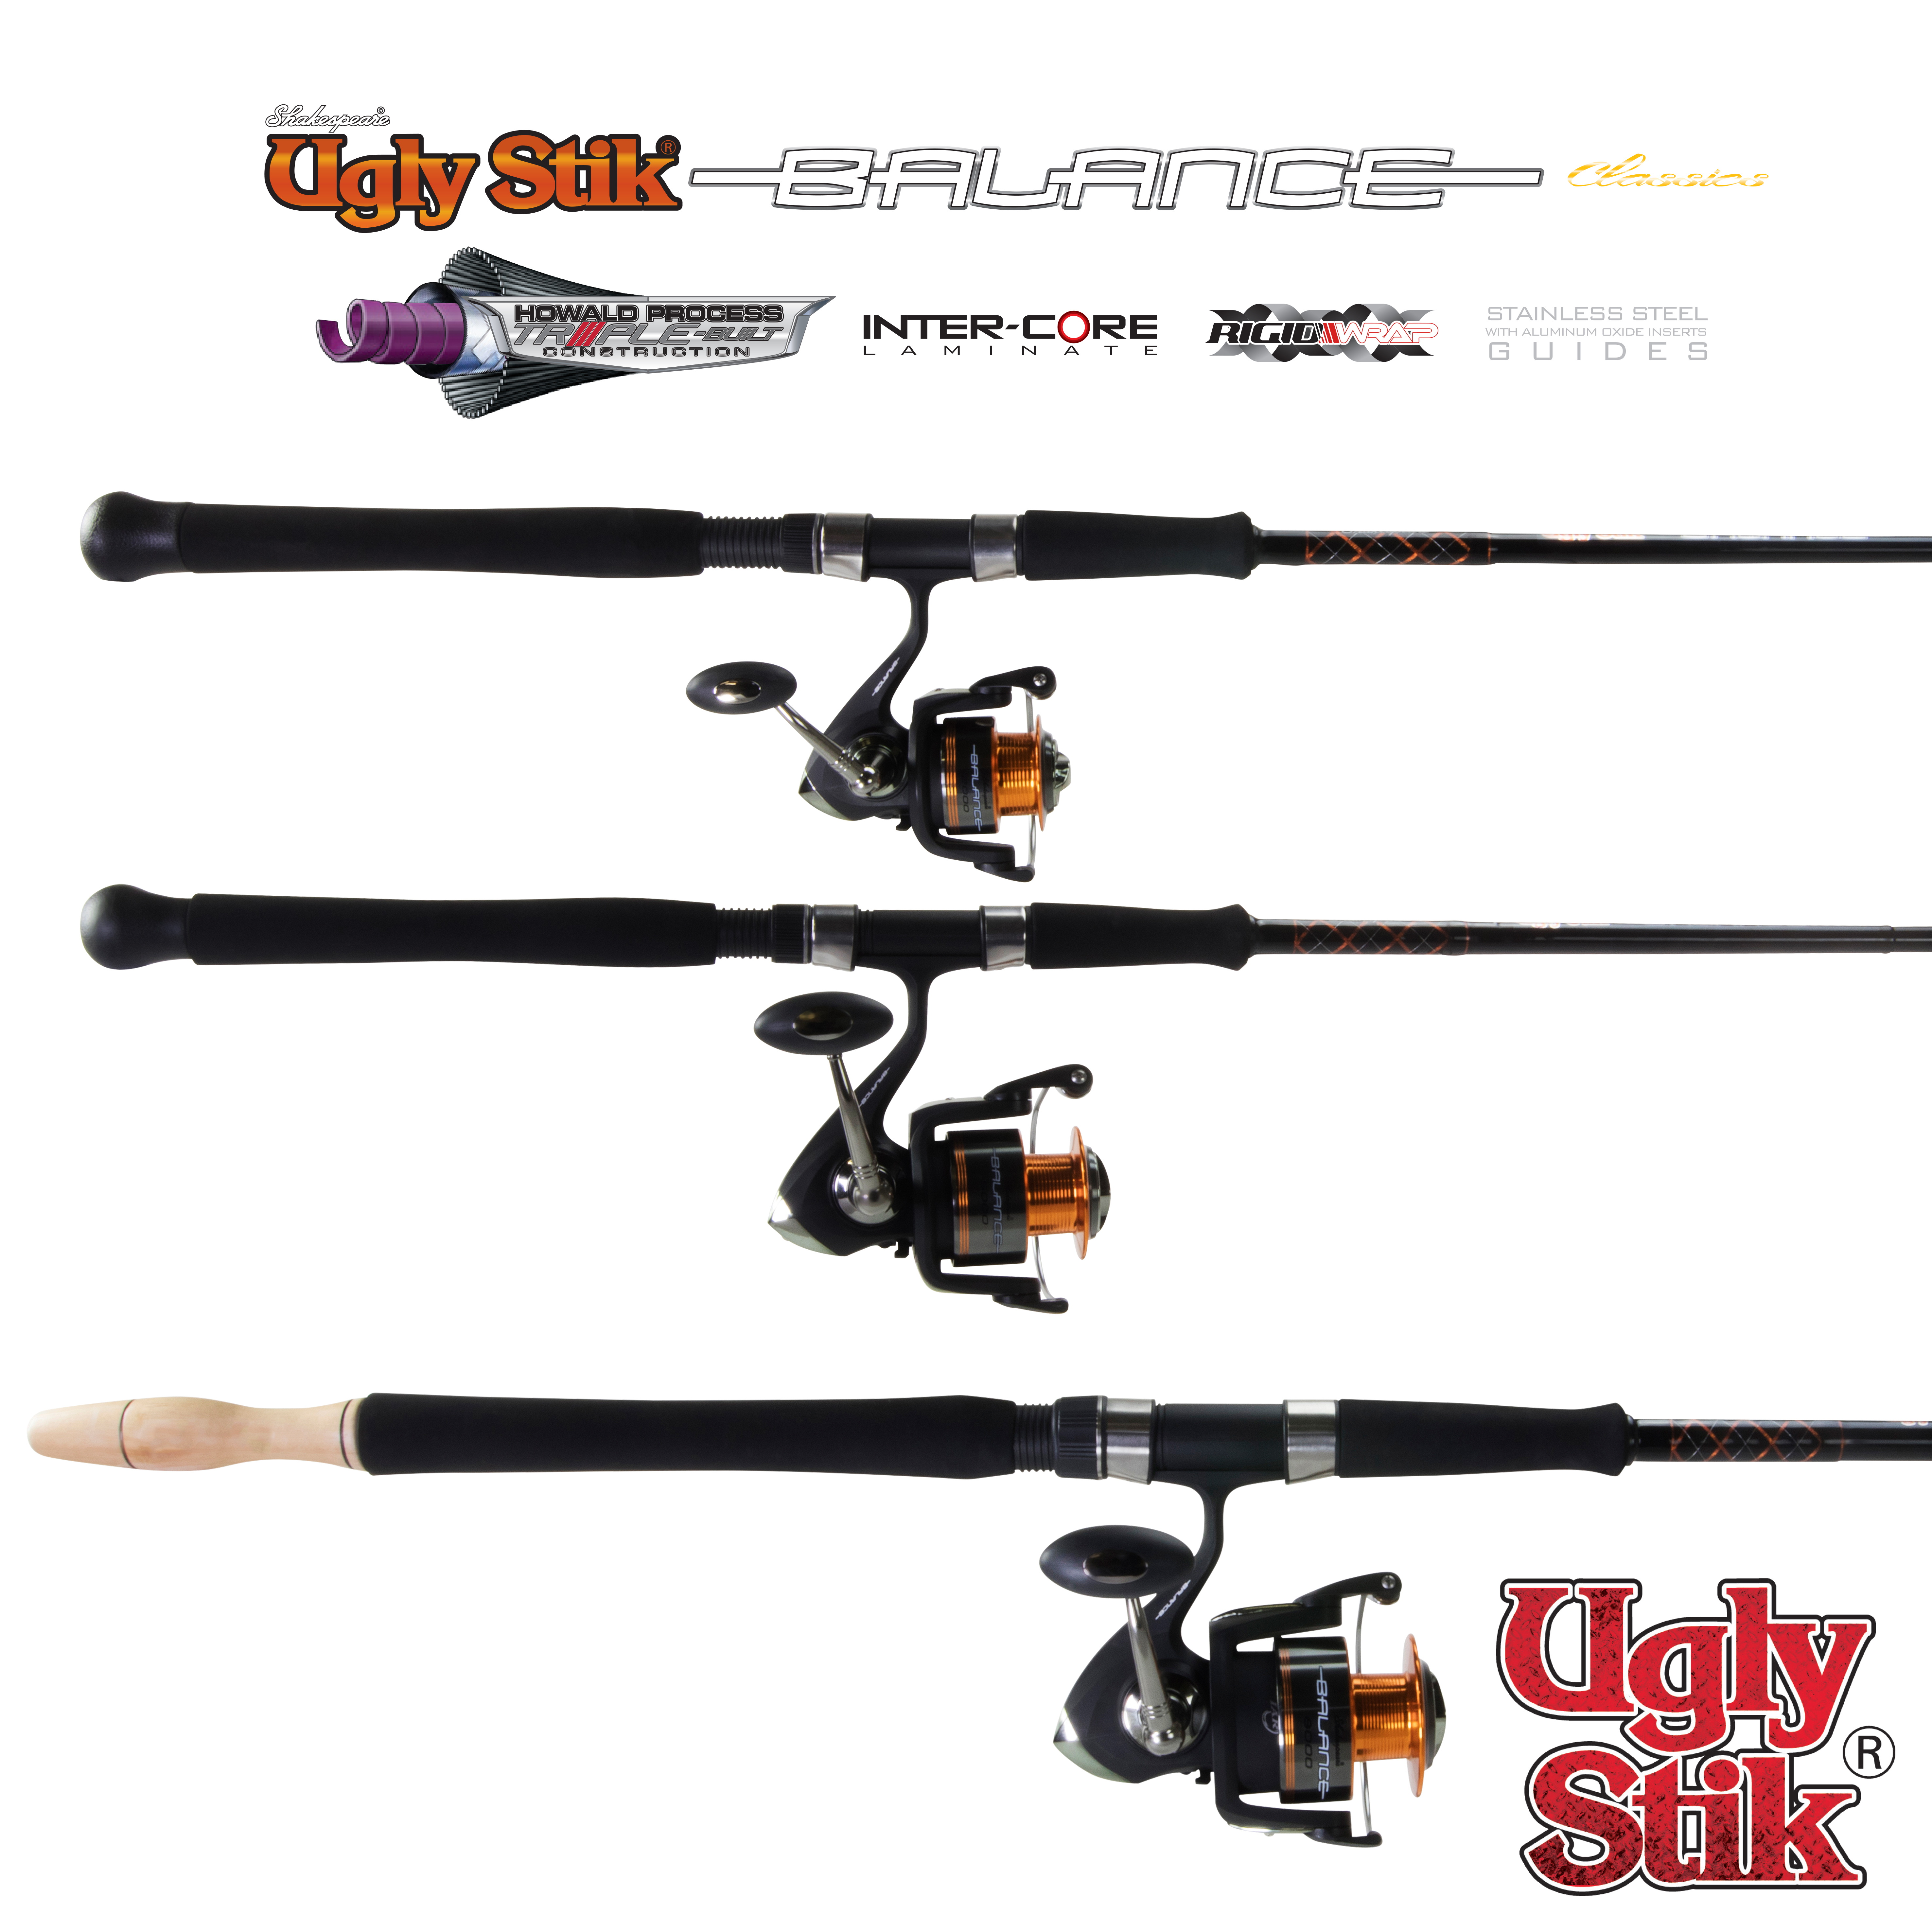 The Ugly Stik Balance Combo has gotten a makeover